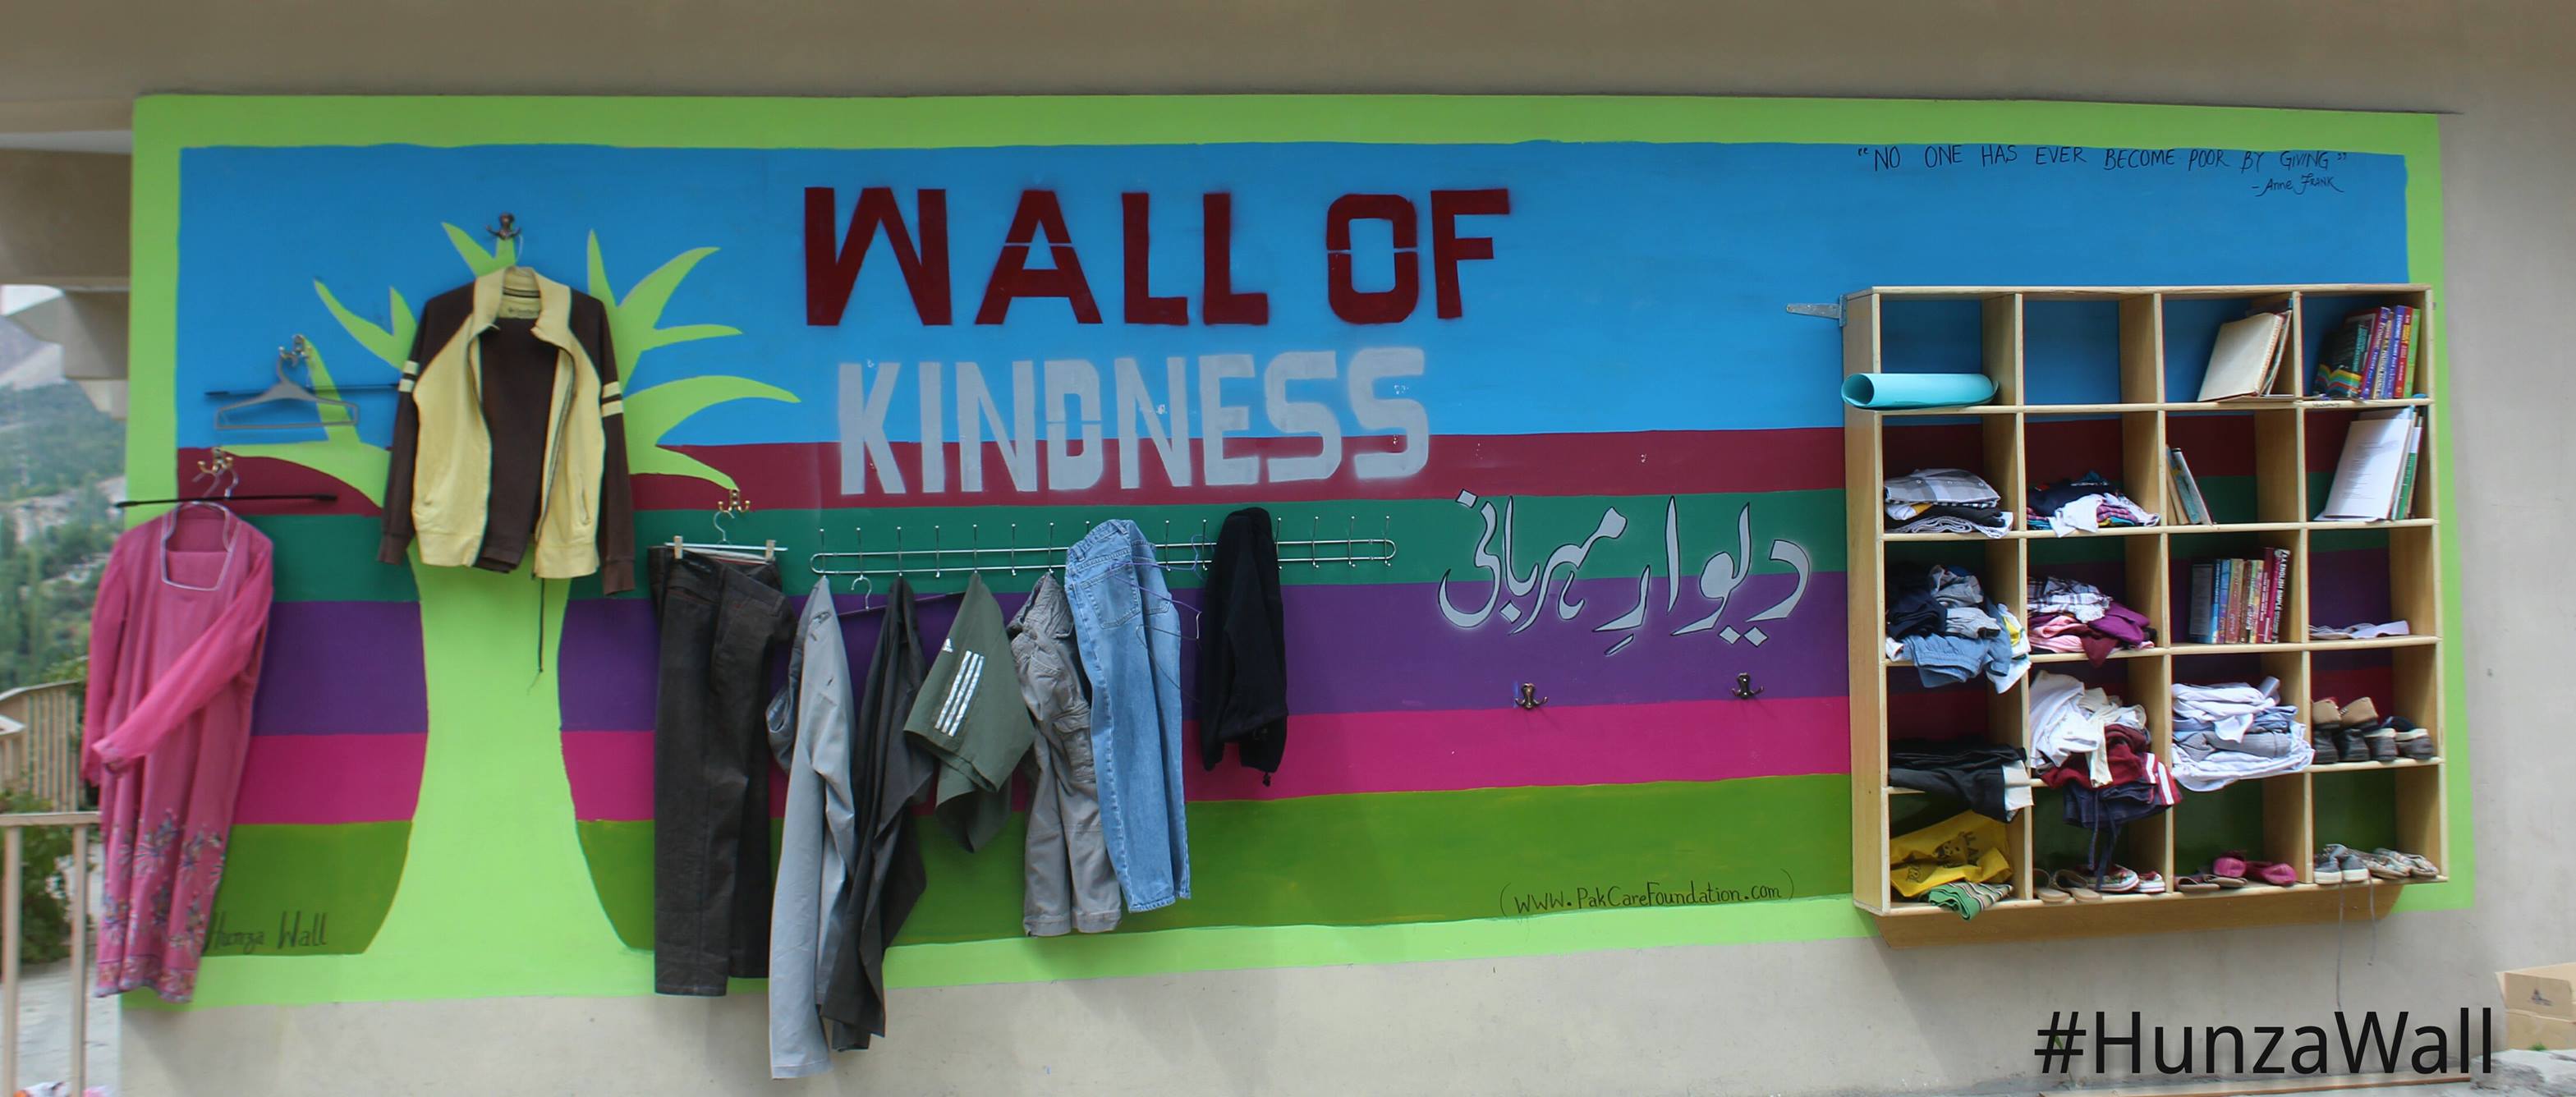 Image result for wall of kindness